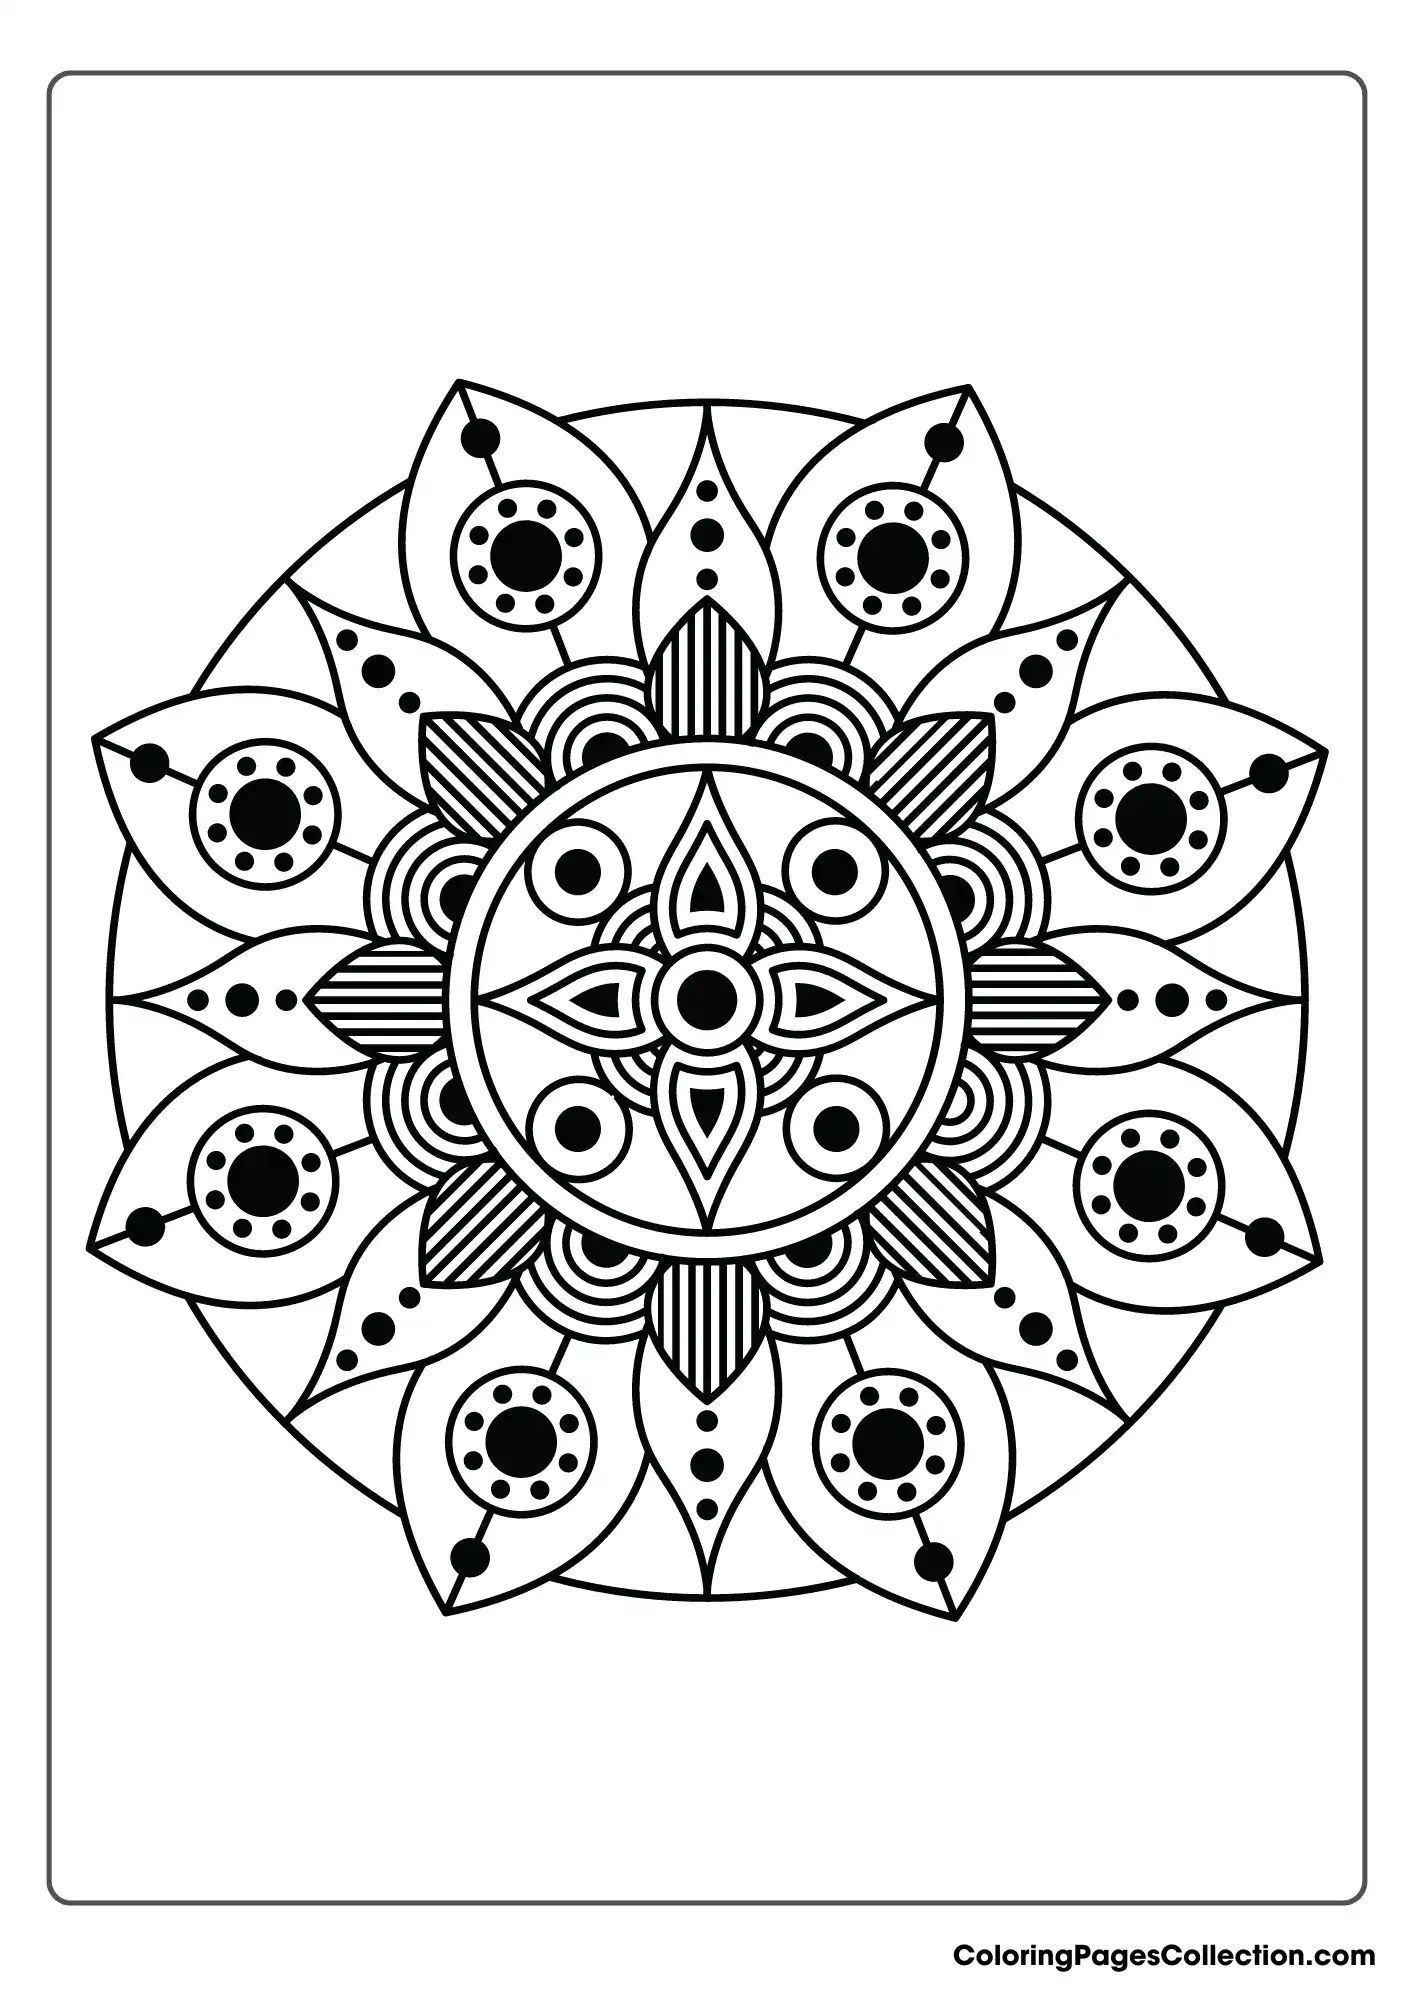 Coloring pages for teens, Design Art 1